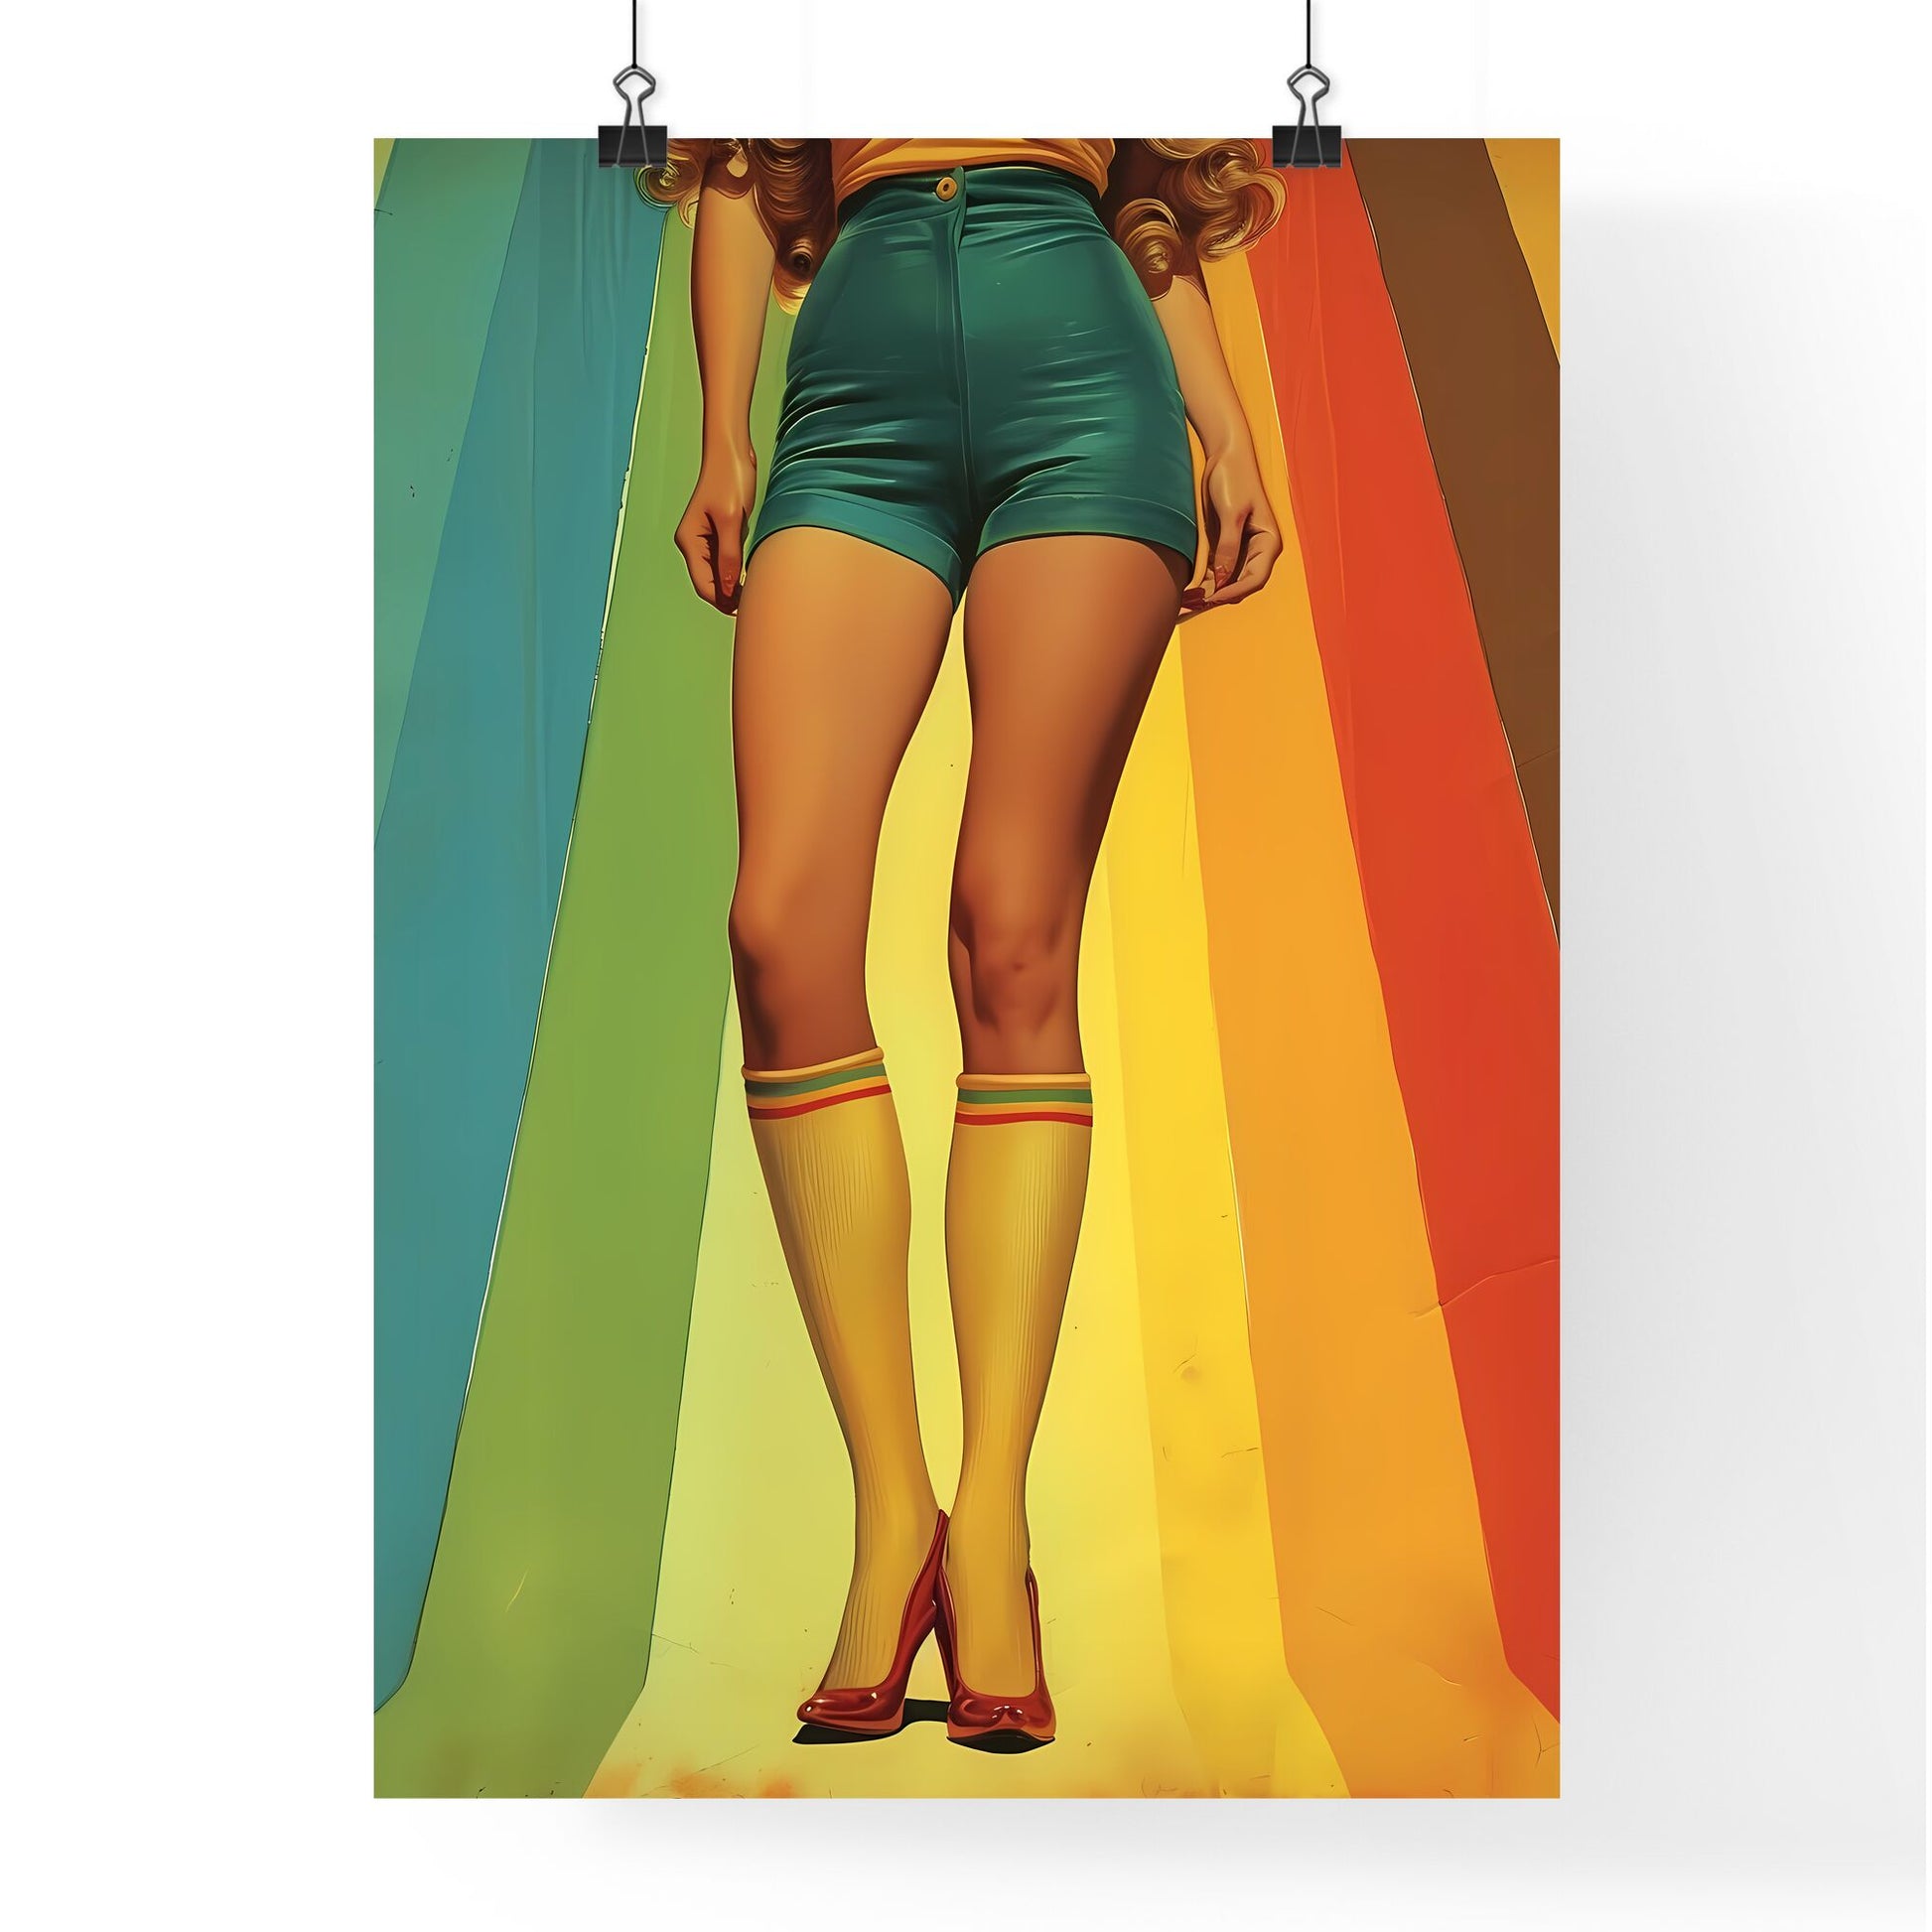 Uncommon pin up girl illustration - Art print of a woman wearing shorts and rainbow socks Default Title